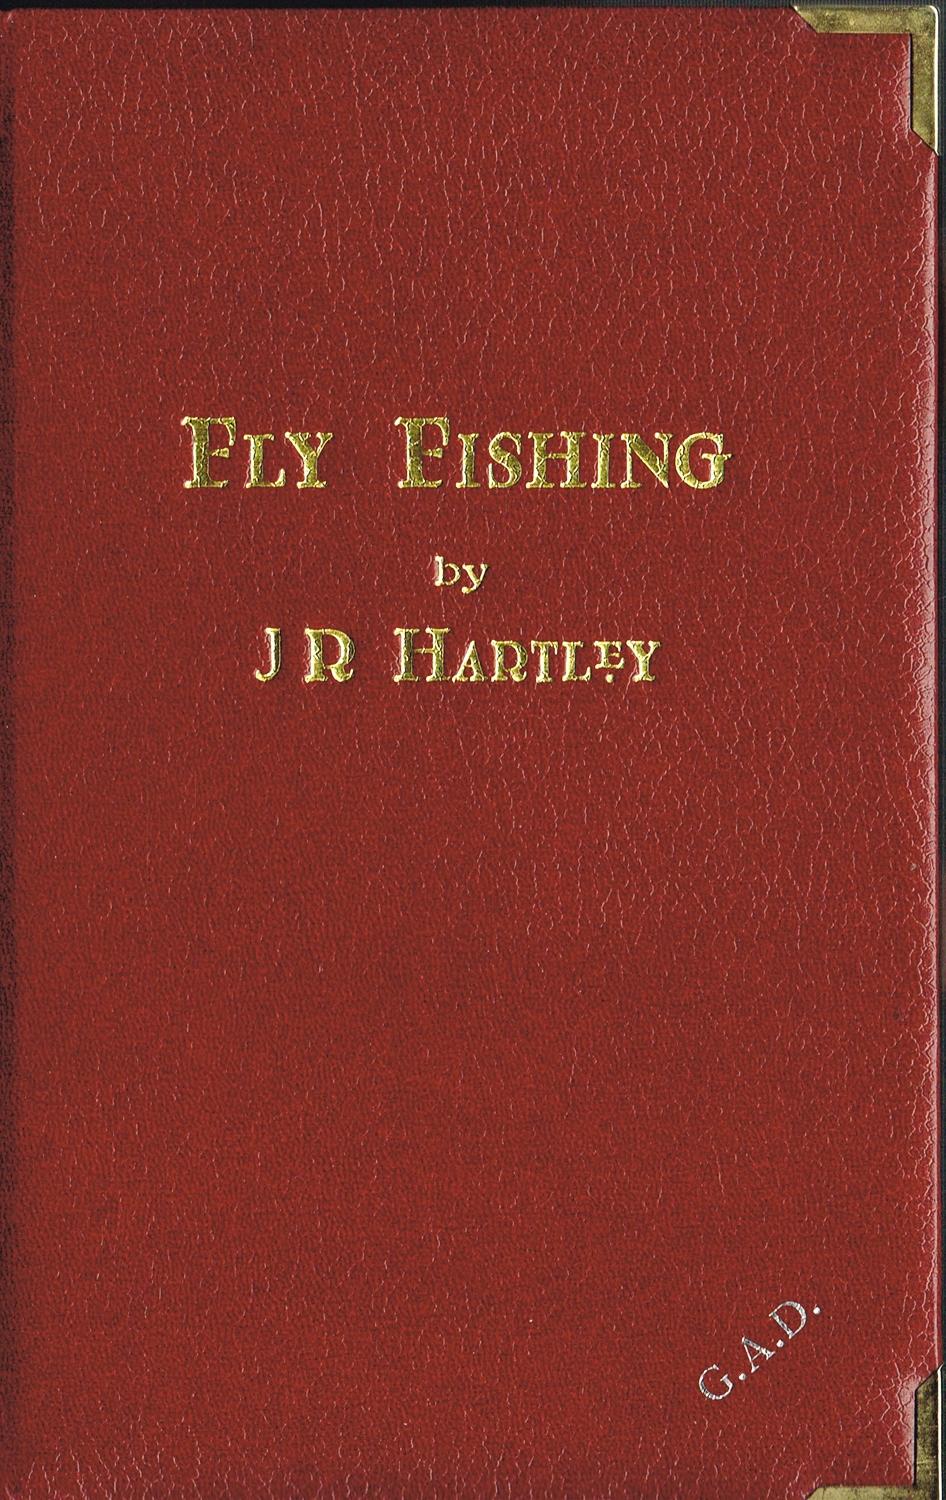 Fly Fishing : Memories Of Angling Days : by J.R.Hartley ; ( Illustrator )  Patrick Benson: New Hardcover (1992) | Sapphire Books